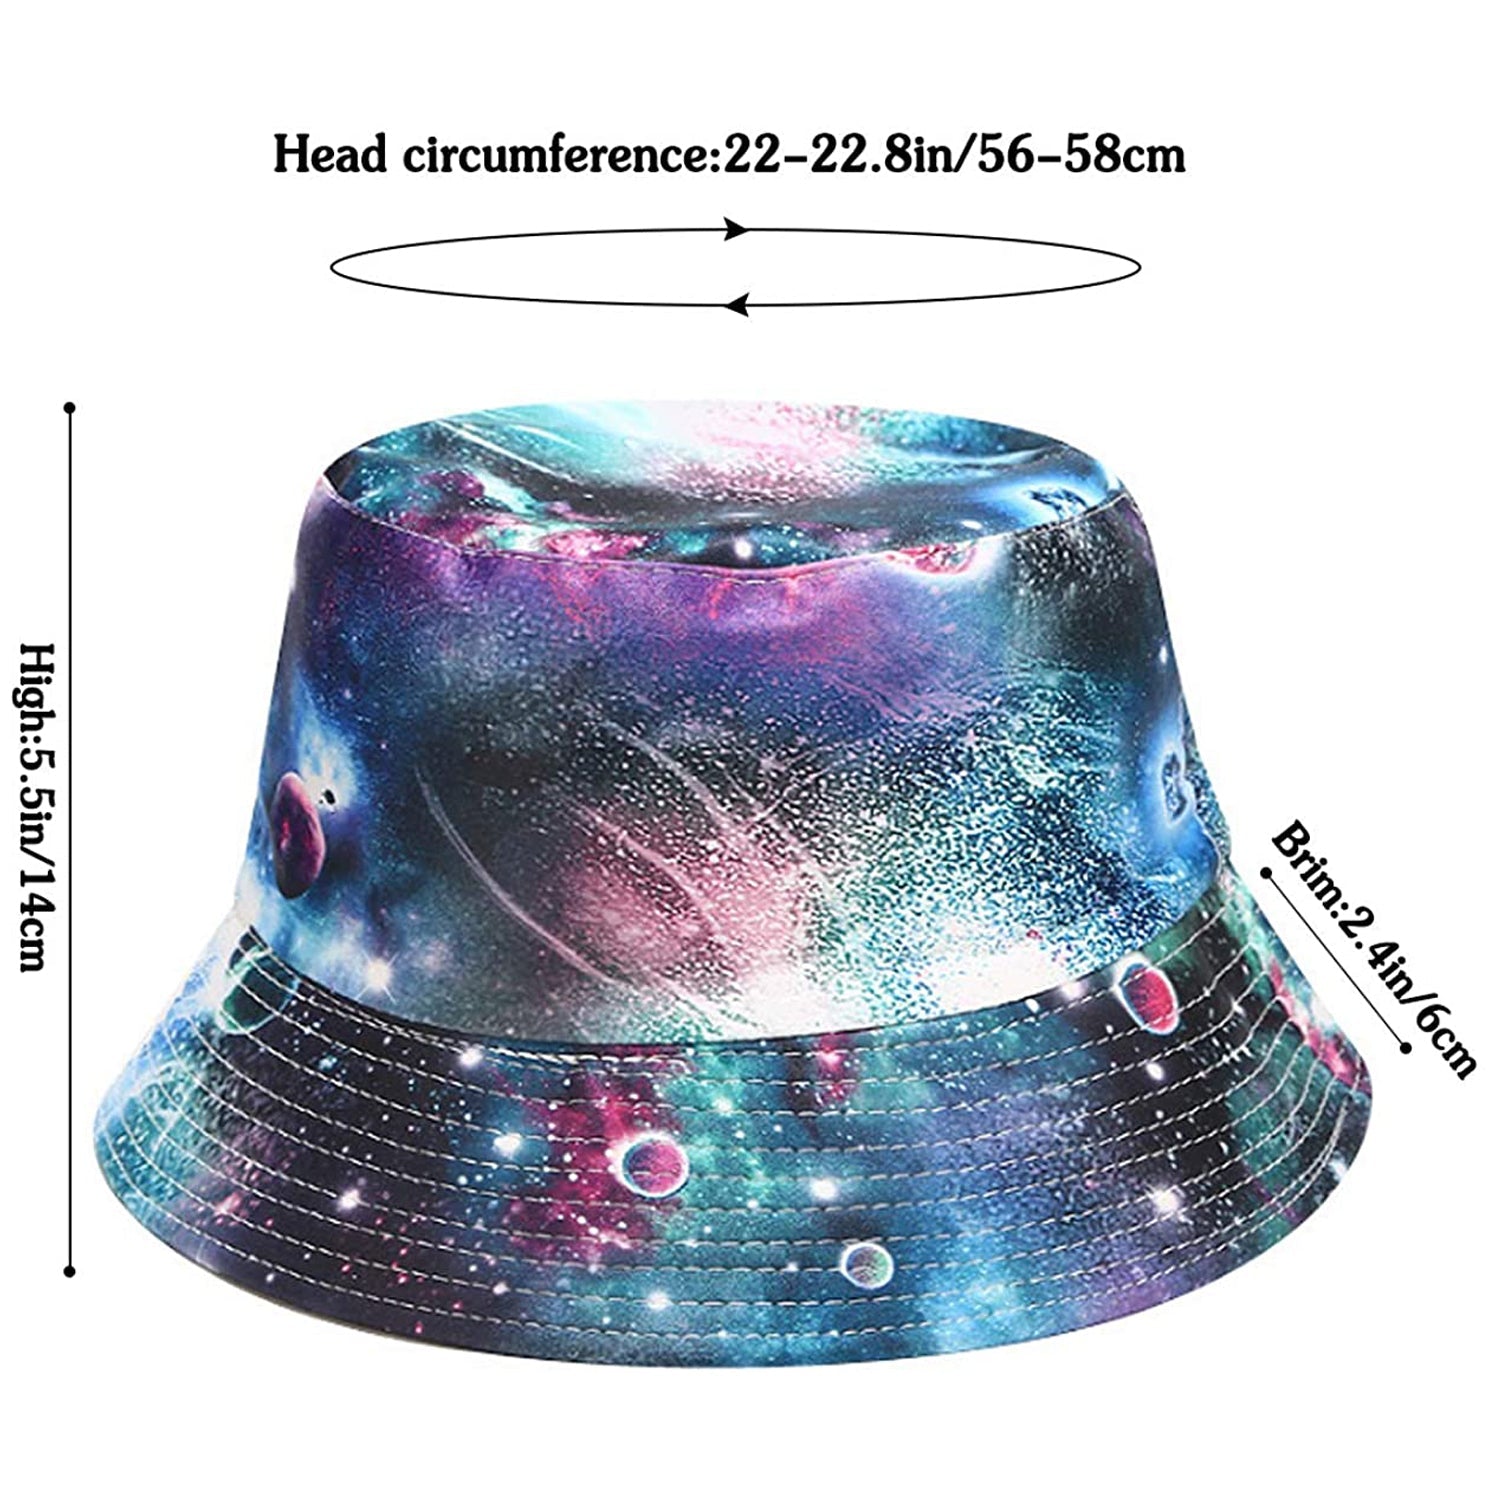 TOPONE ACCESSORIES LIMITED Custom Sublimate Printed Pattern Packable Reversible Fisherman Outdoor Bucket Hat Topone Accessories Ltd. 